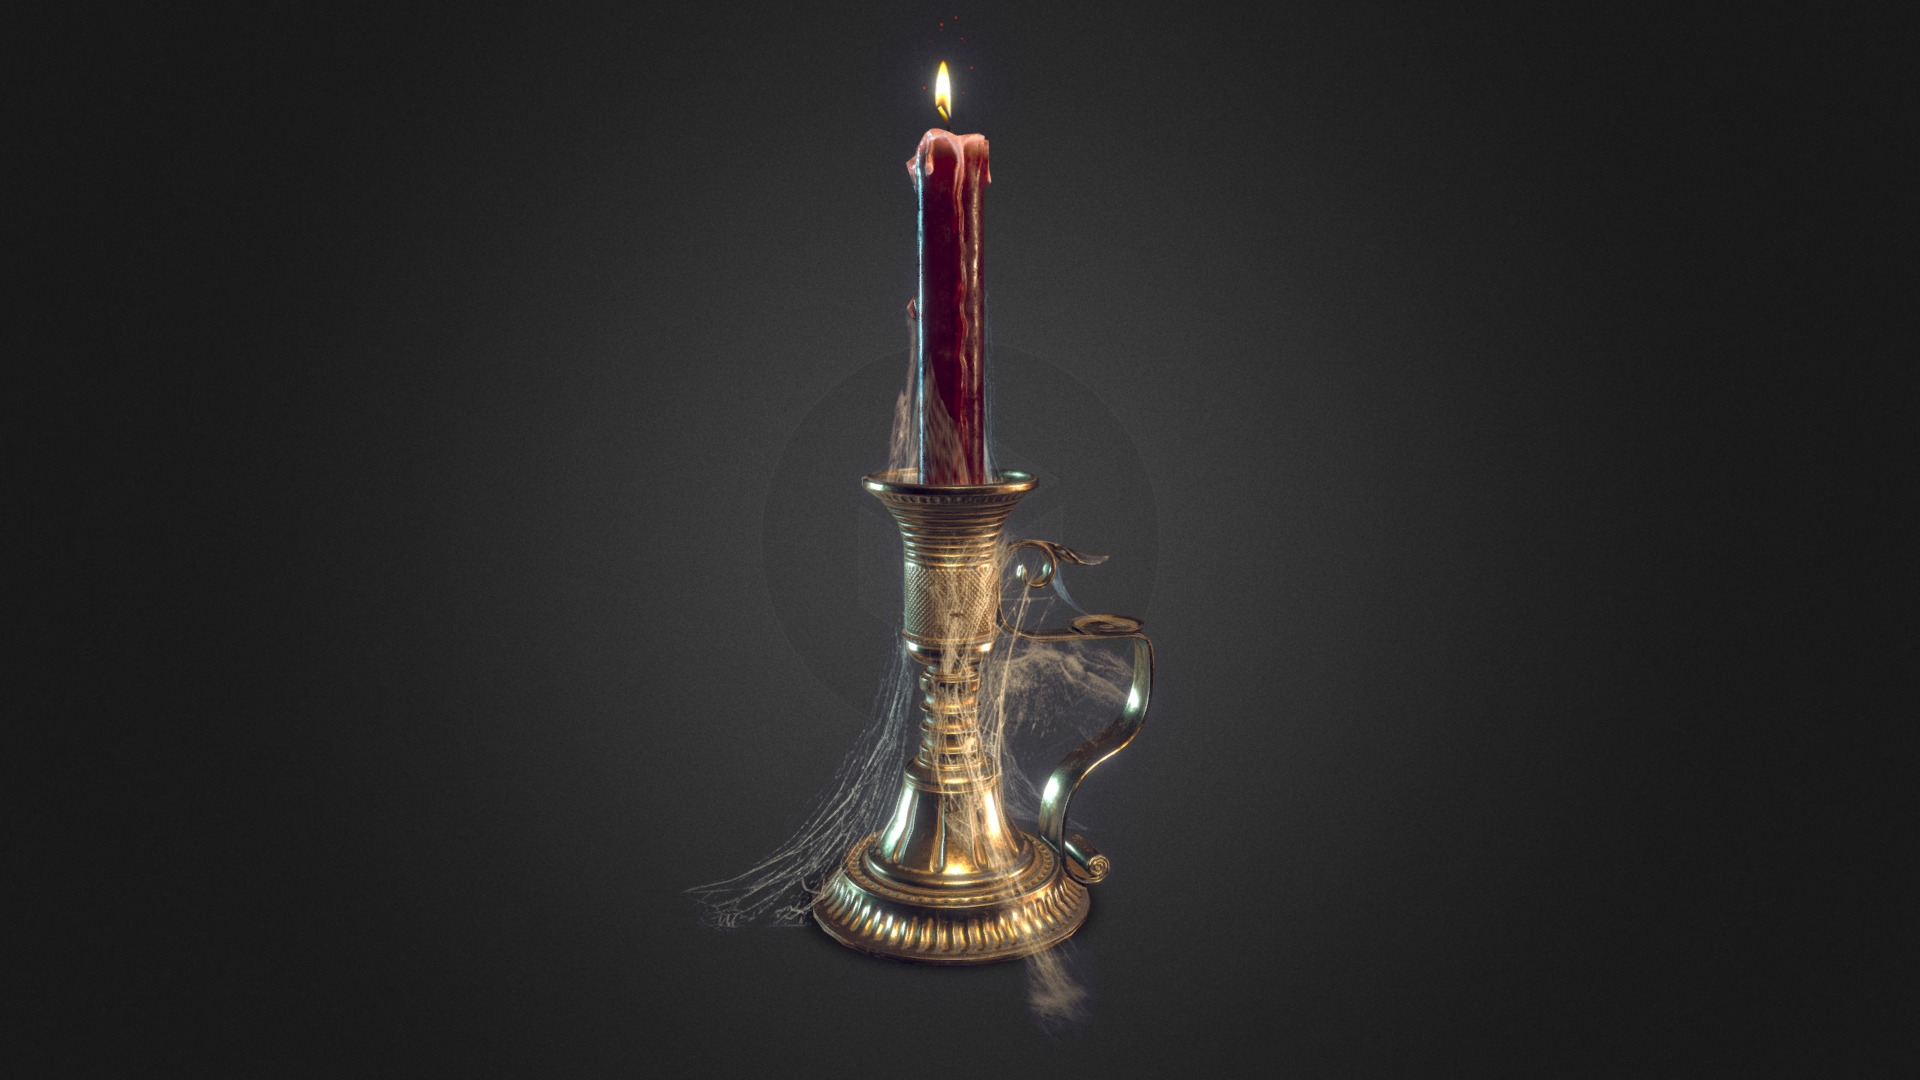 3D model Candle DEMO Sketchfab (tuto available) - This is a 3D model of the Candle DEMO Sketchfab (tuto available). The 3D model is about a lit candle with a flame.